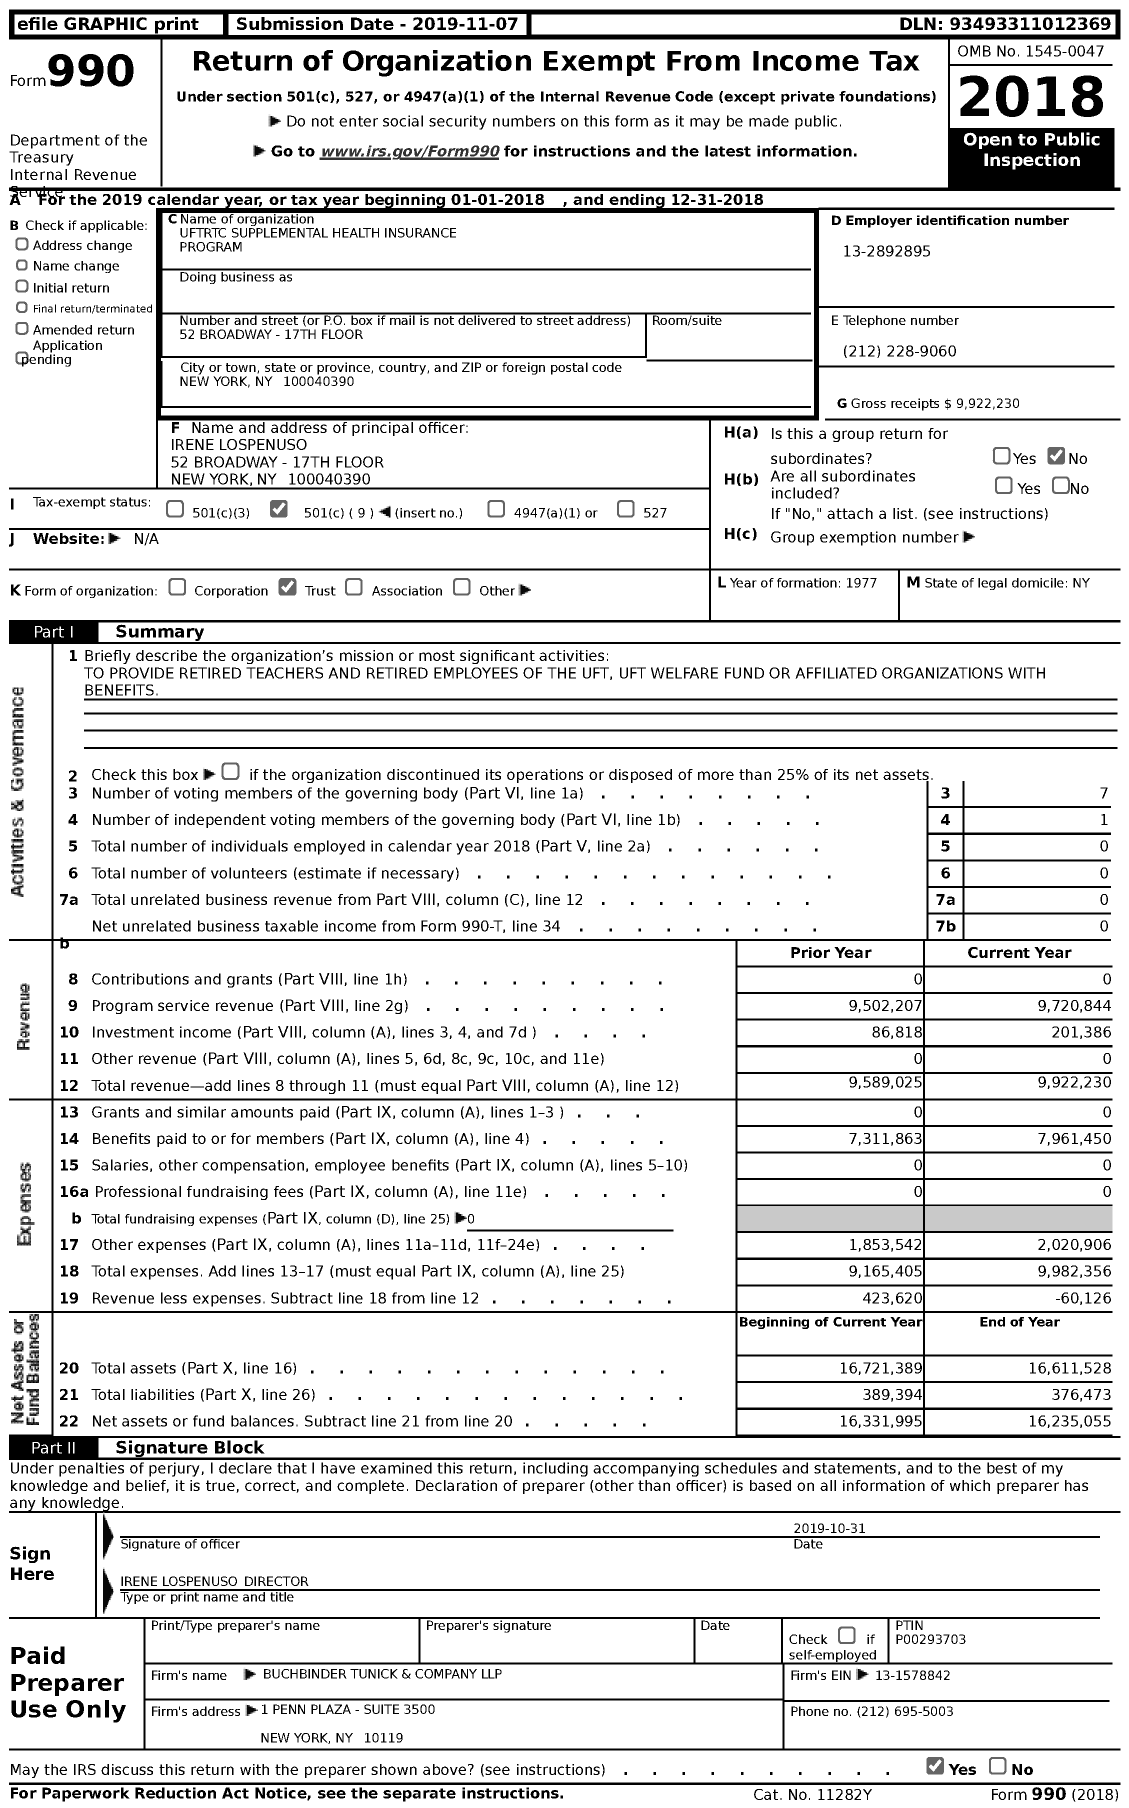 Image of first page of 2018 Form 990 for Uftrtc Supplemental Health Insurance Program